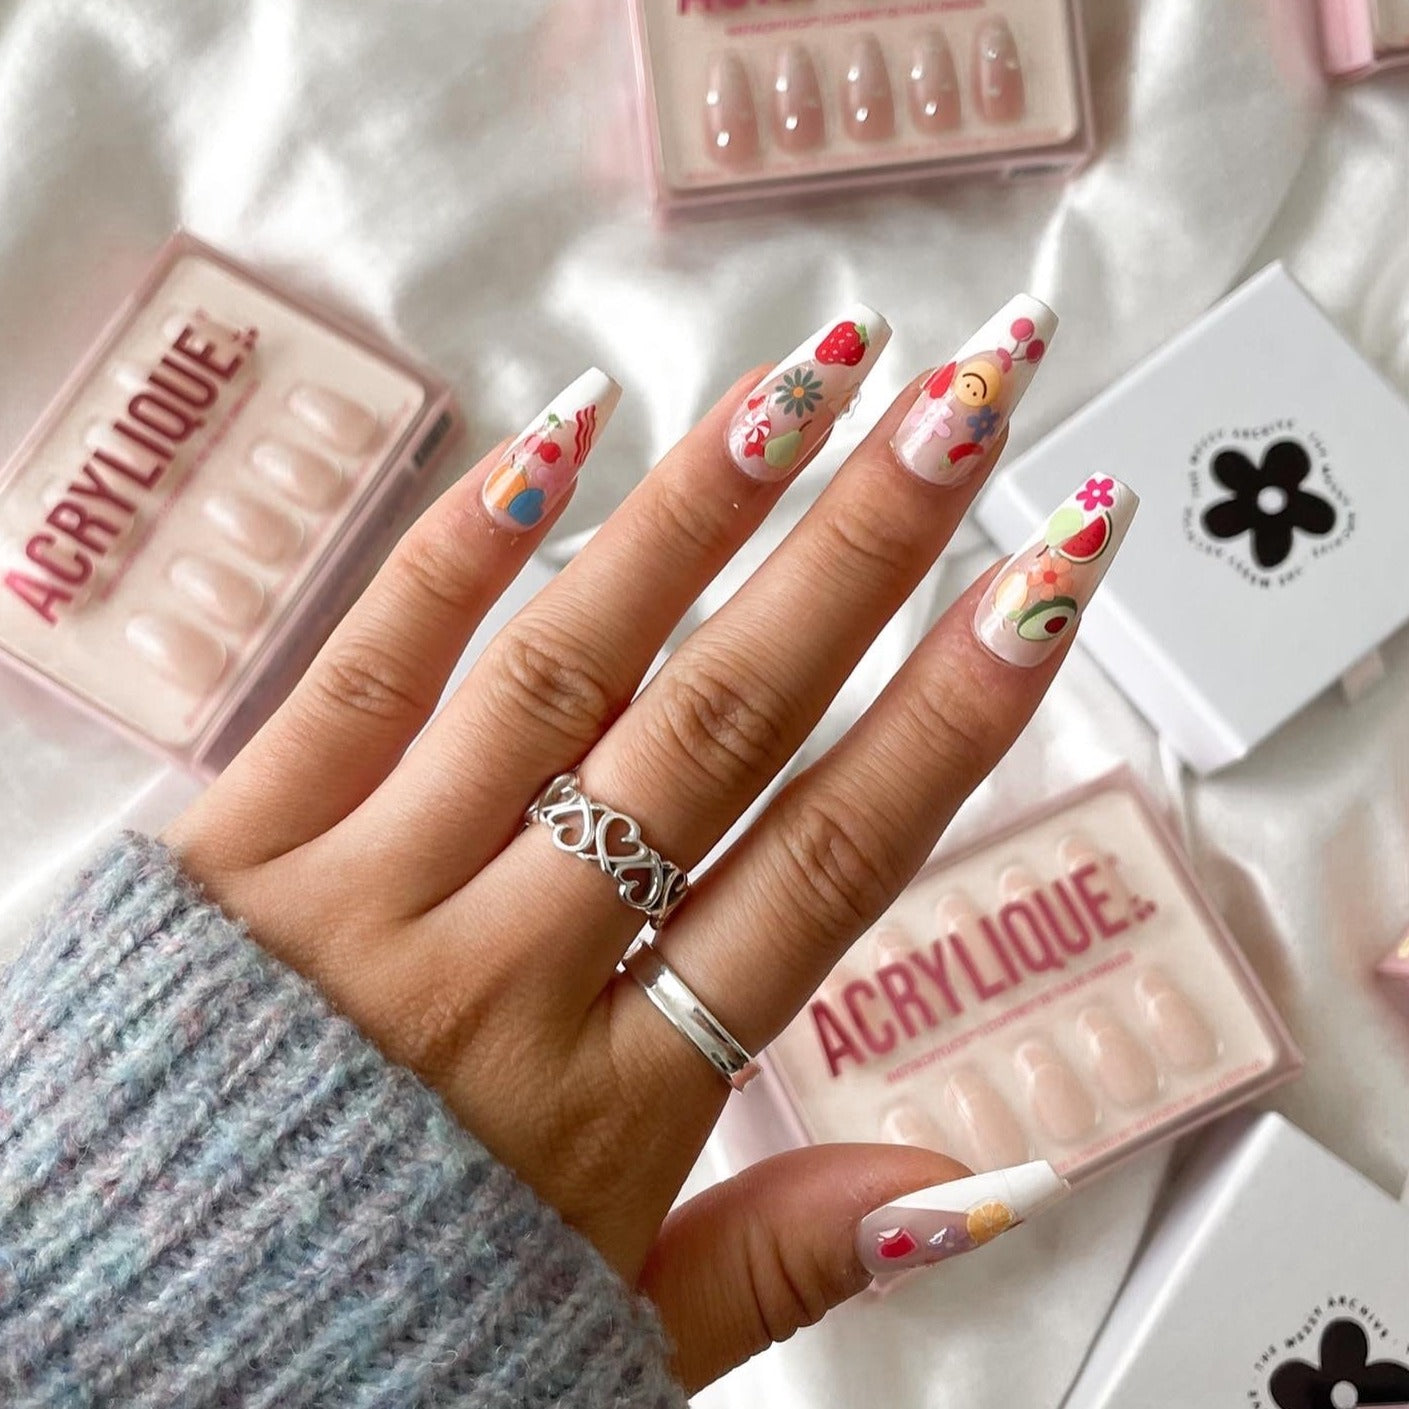 The Messy Archive x ACRYLIQUE Sunday Funday Nail Sticker Pack